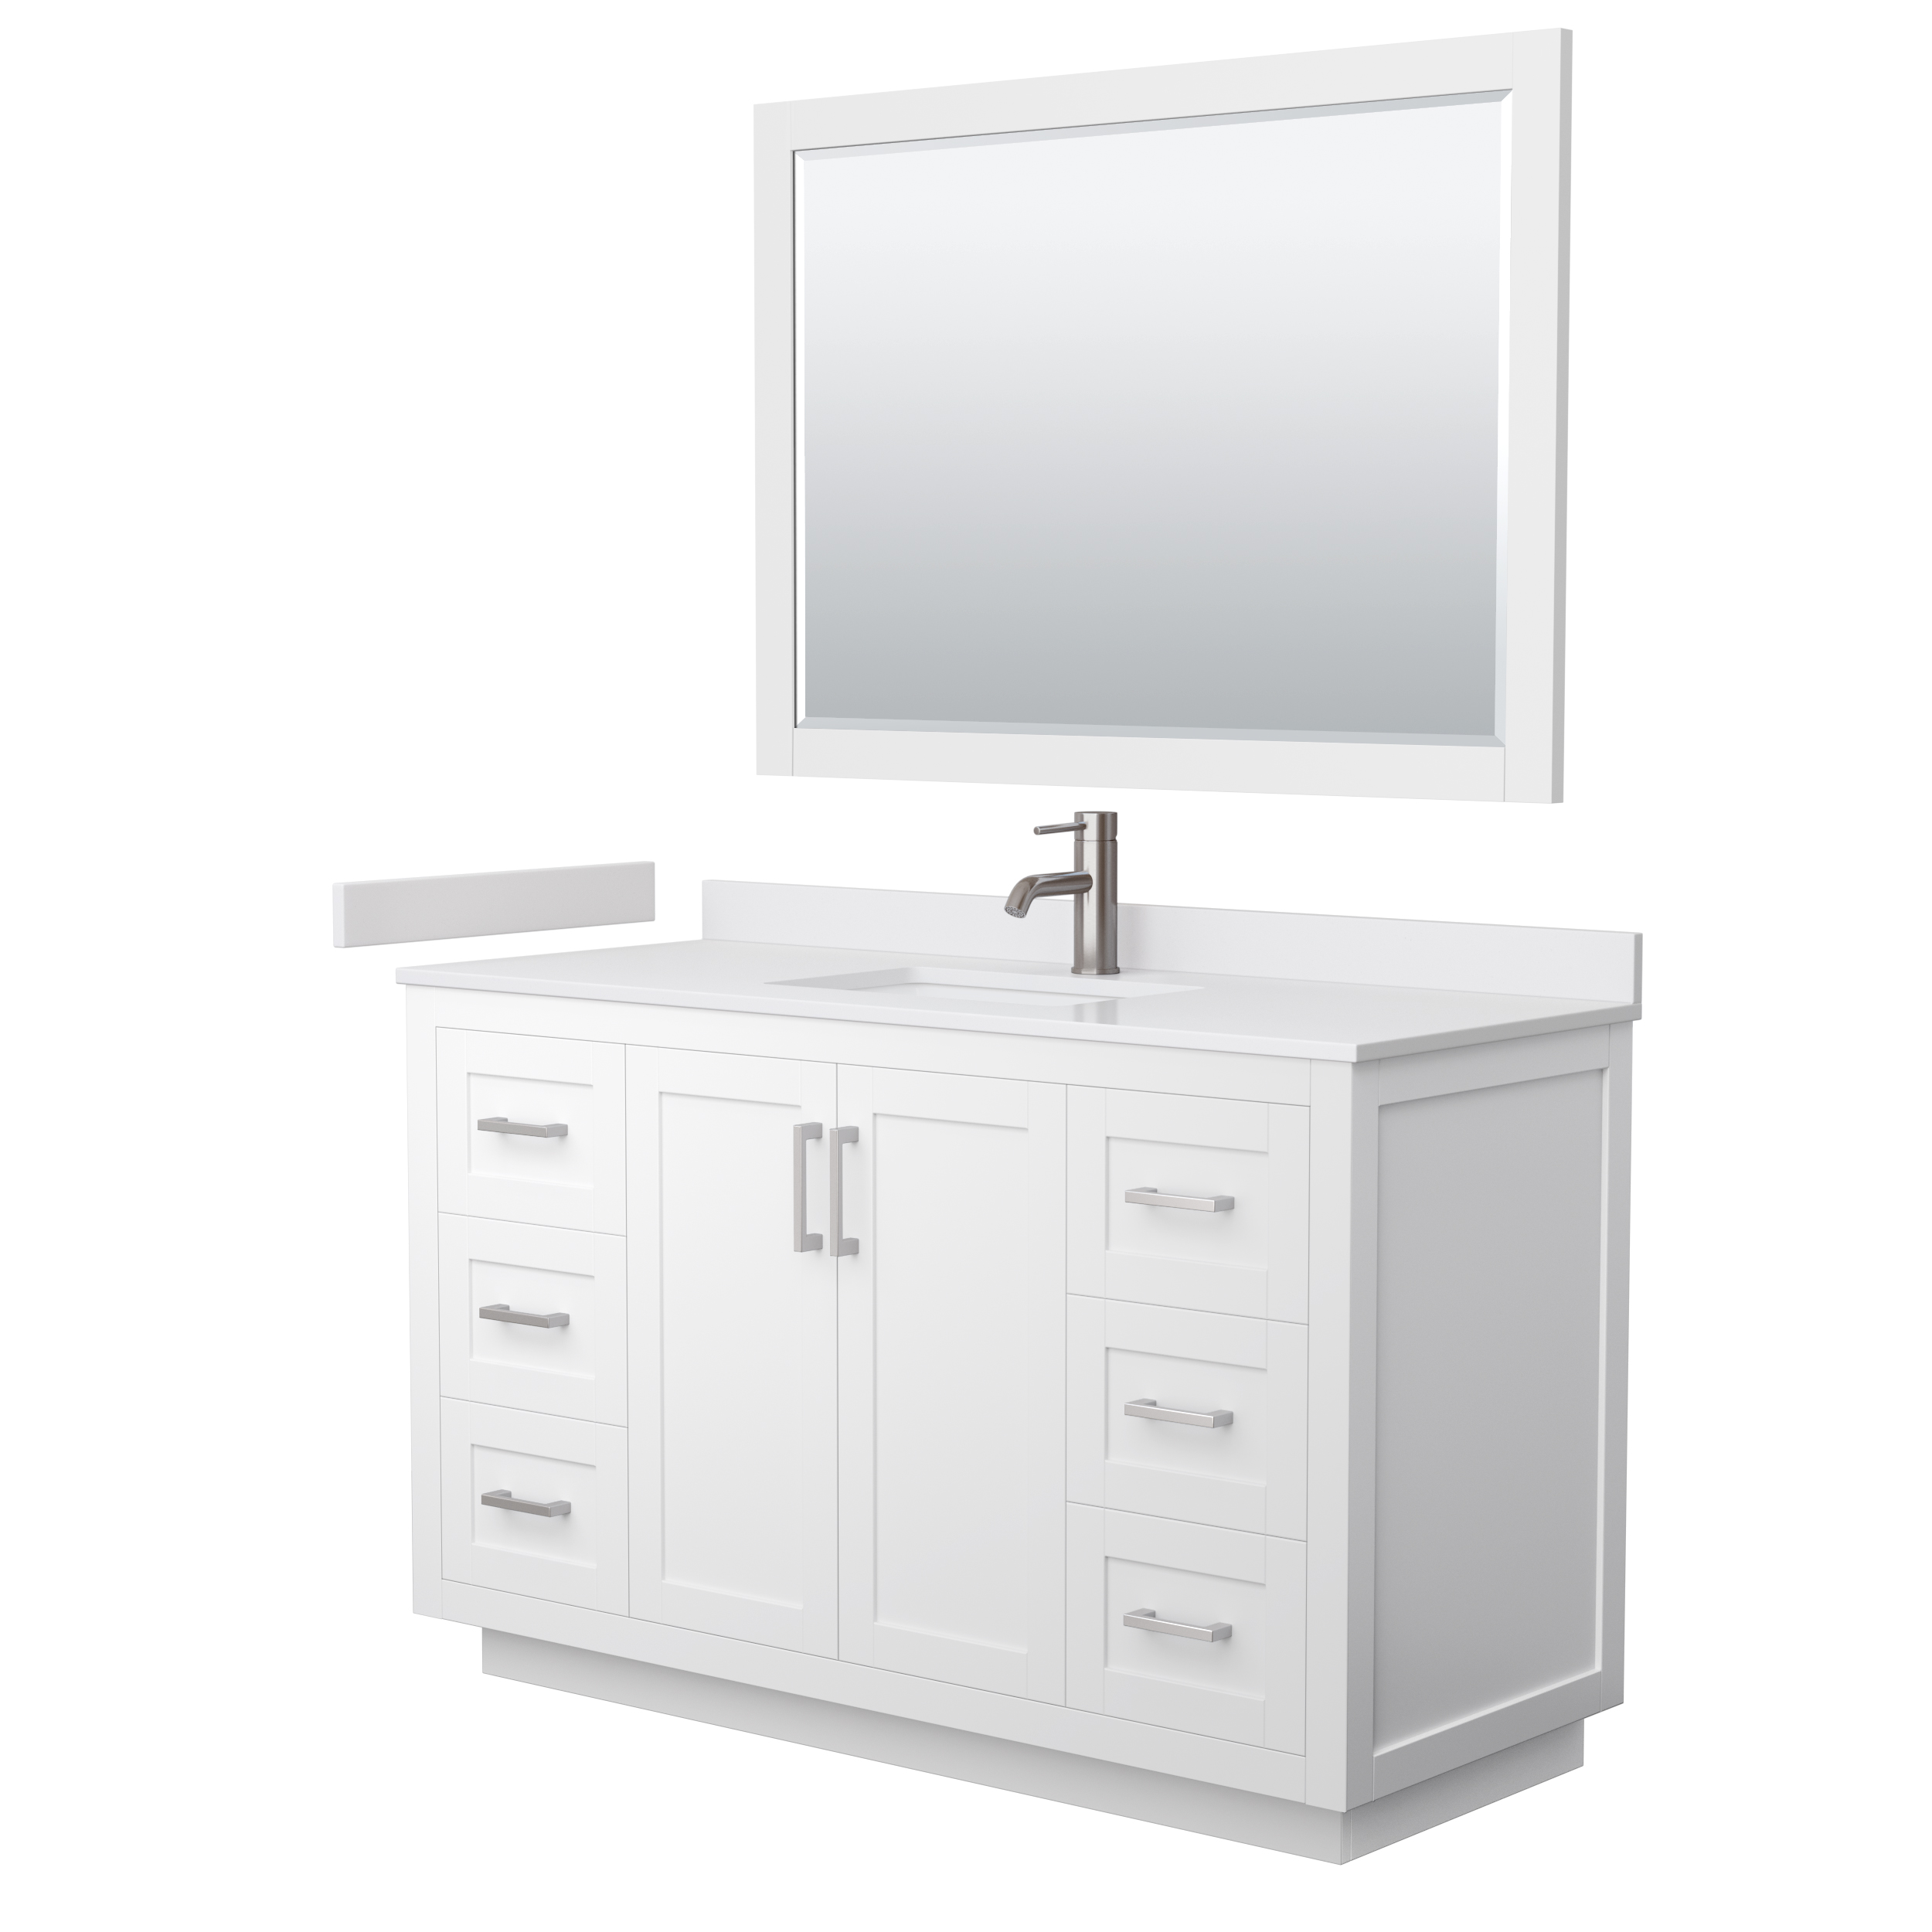 Miranda 48" Single Vanity with Cultured Marble Counter - White WC-2929-48-SGL-VAN-WHT-